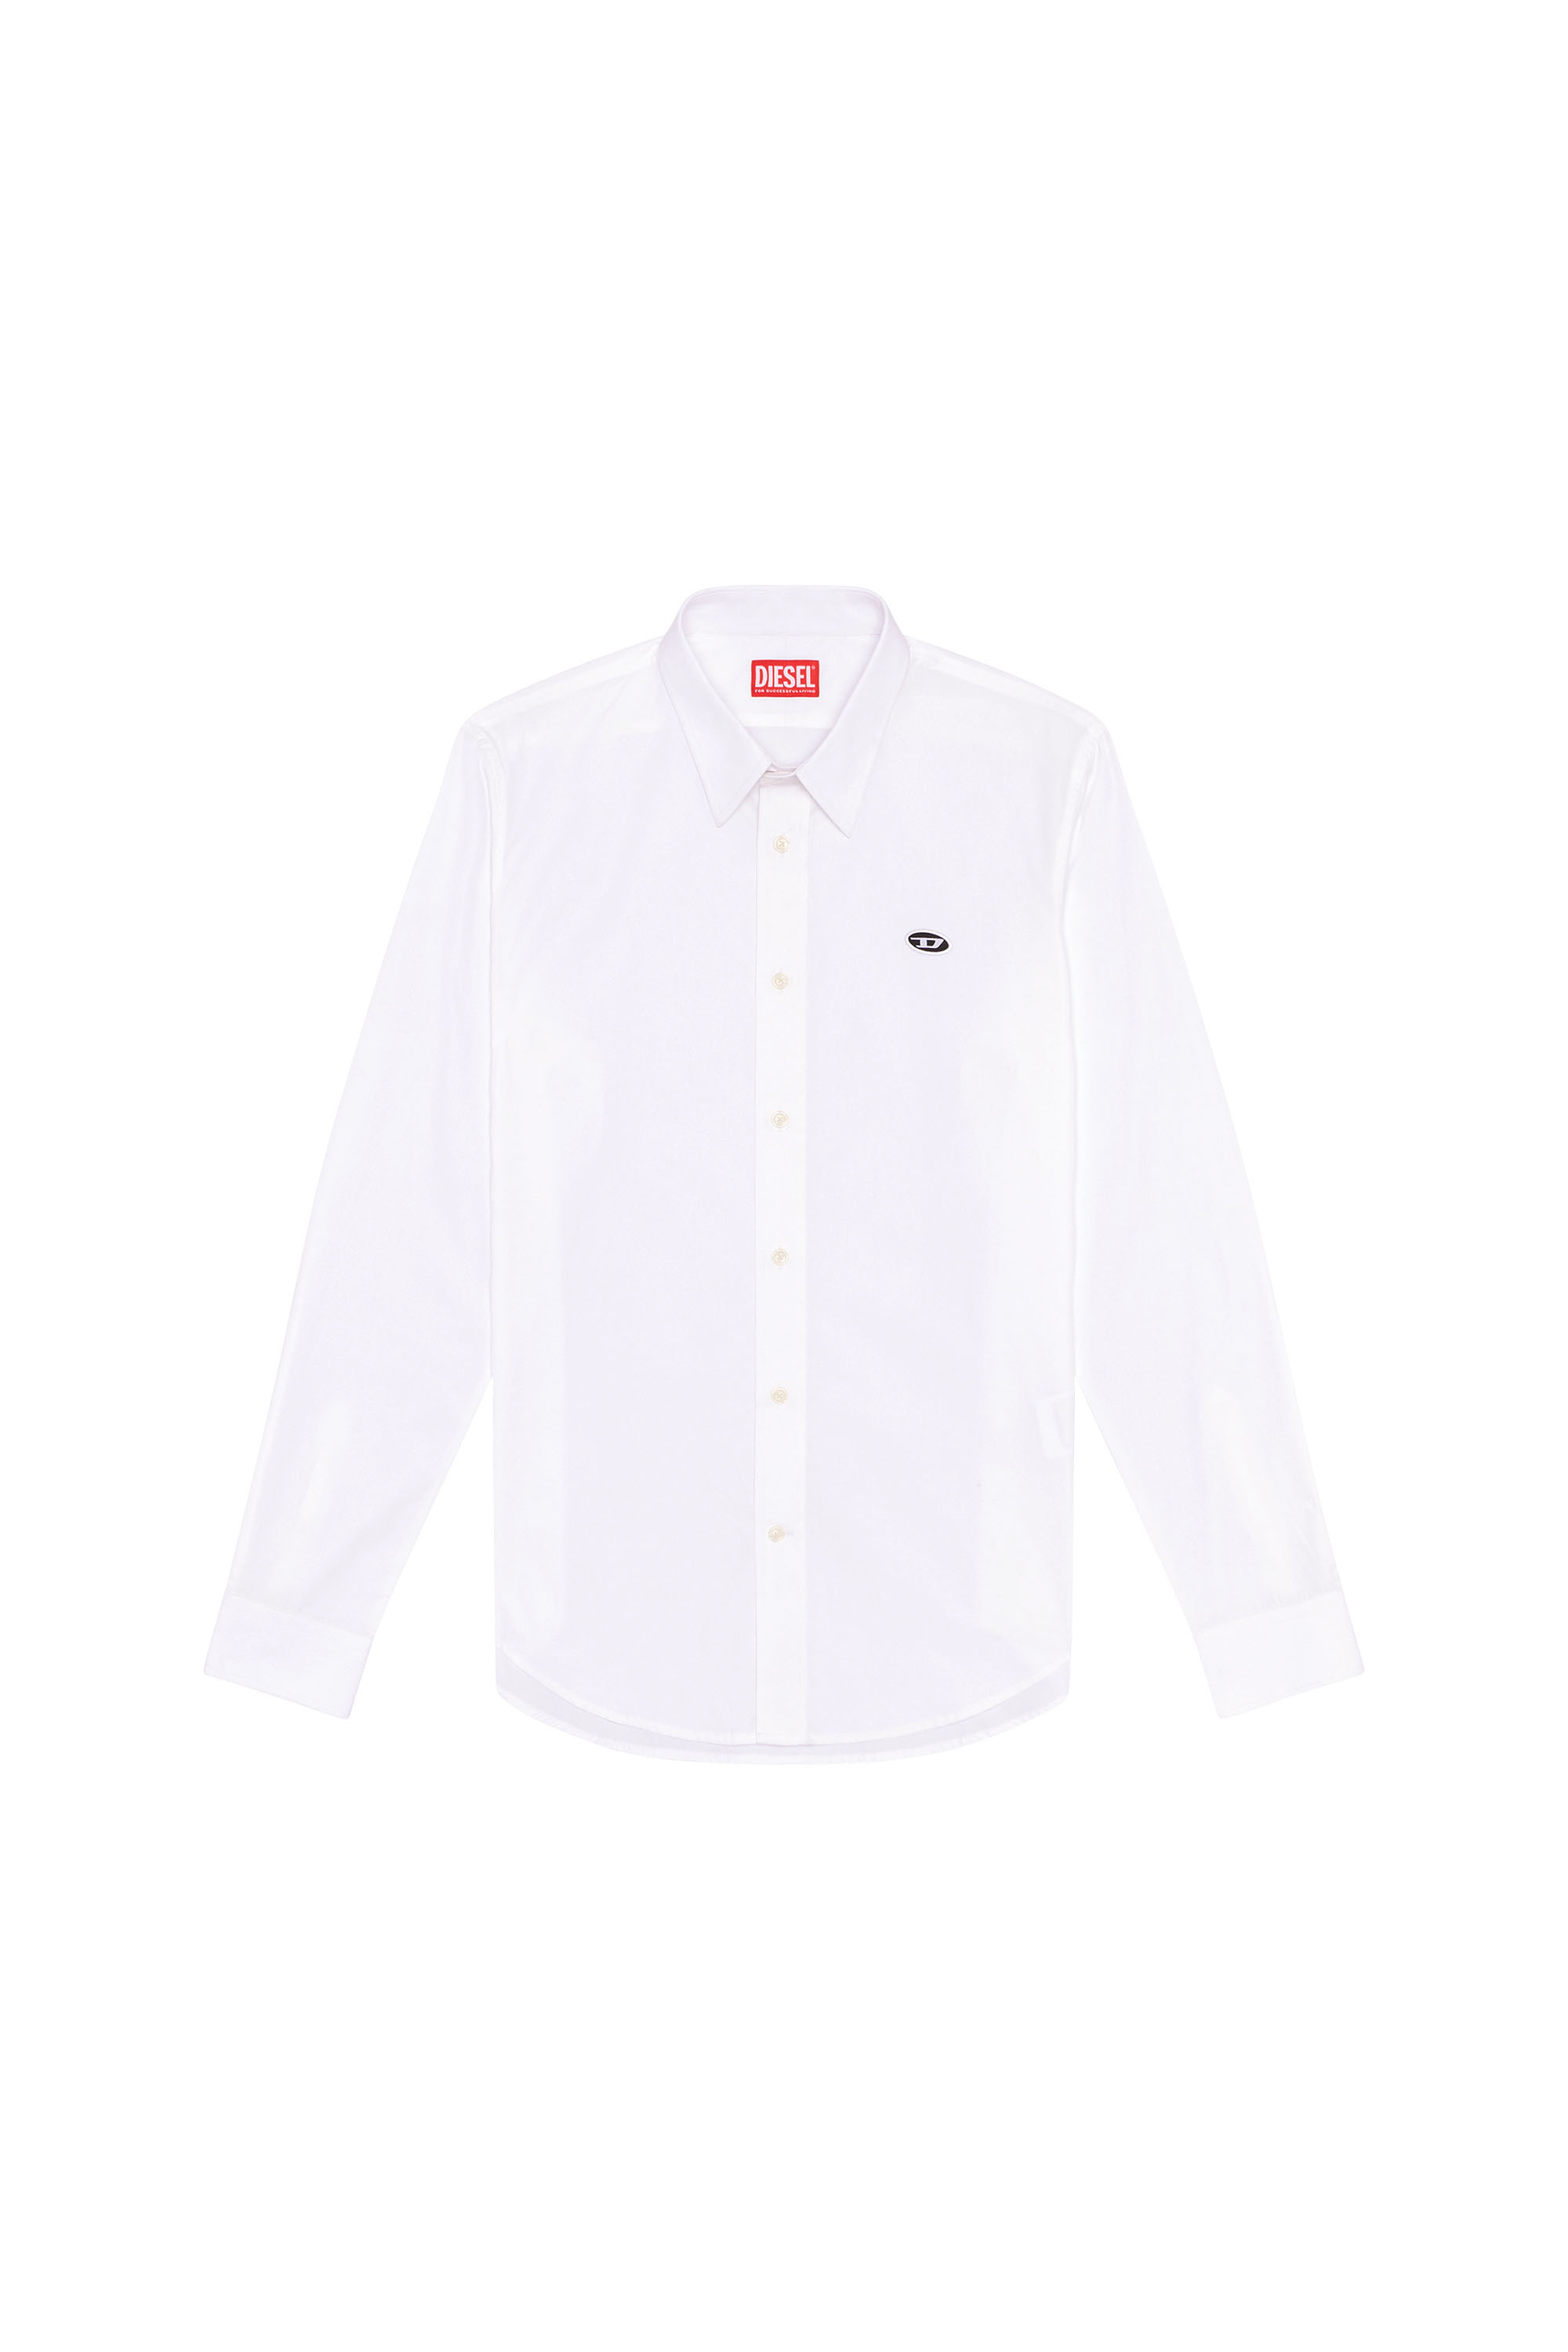 Diesel - S-BENNY-A, Homme Chemise avec empiècement oval D in Blanc - Image 4